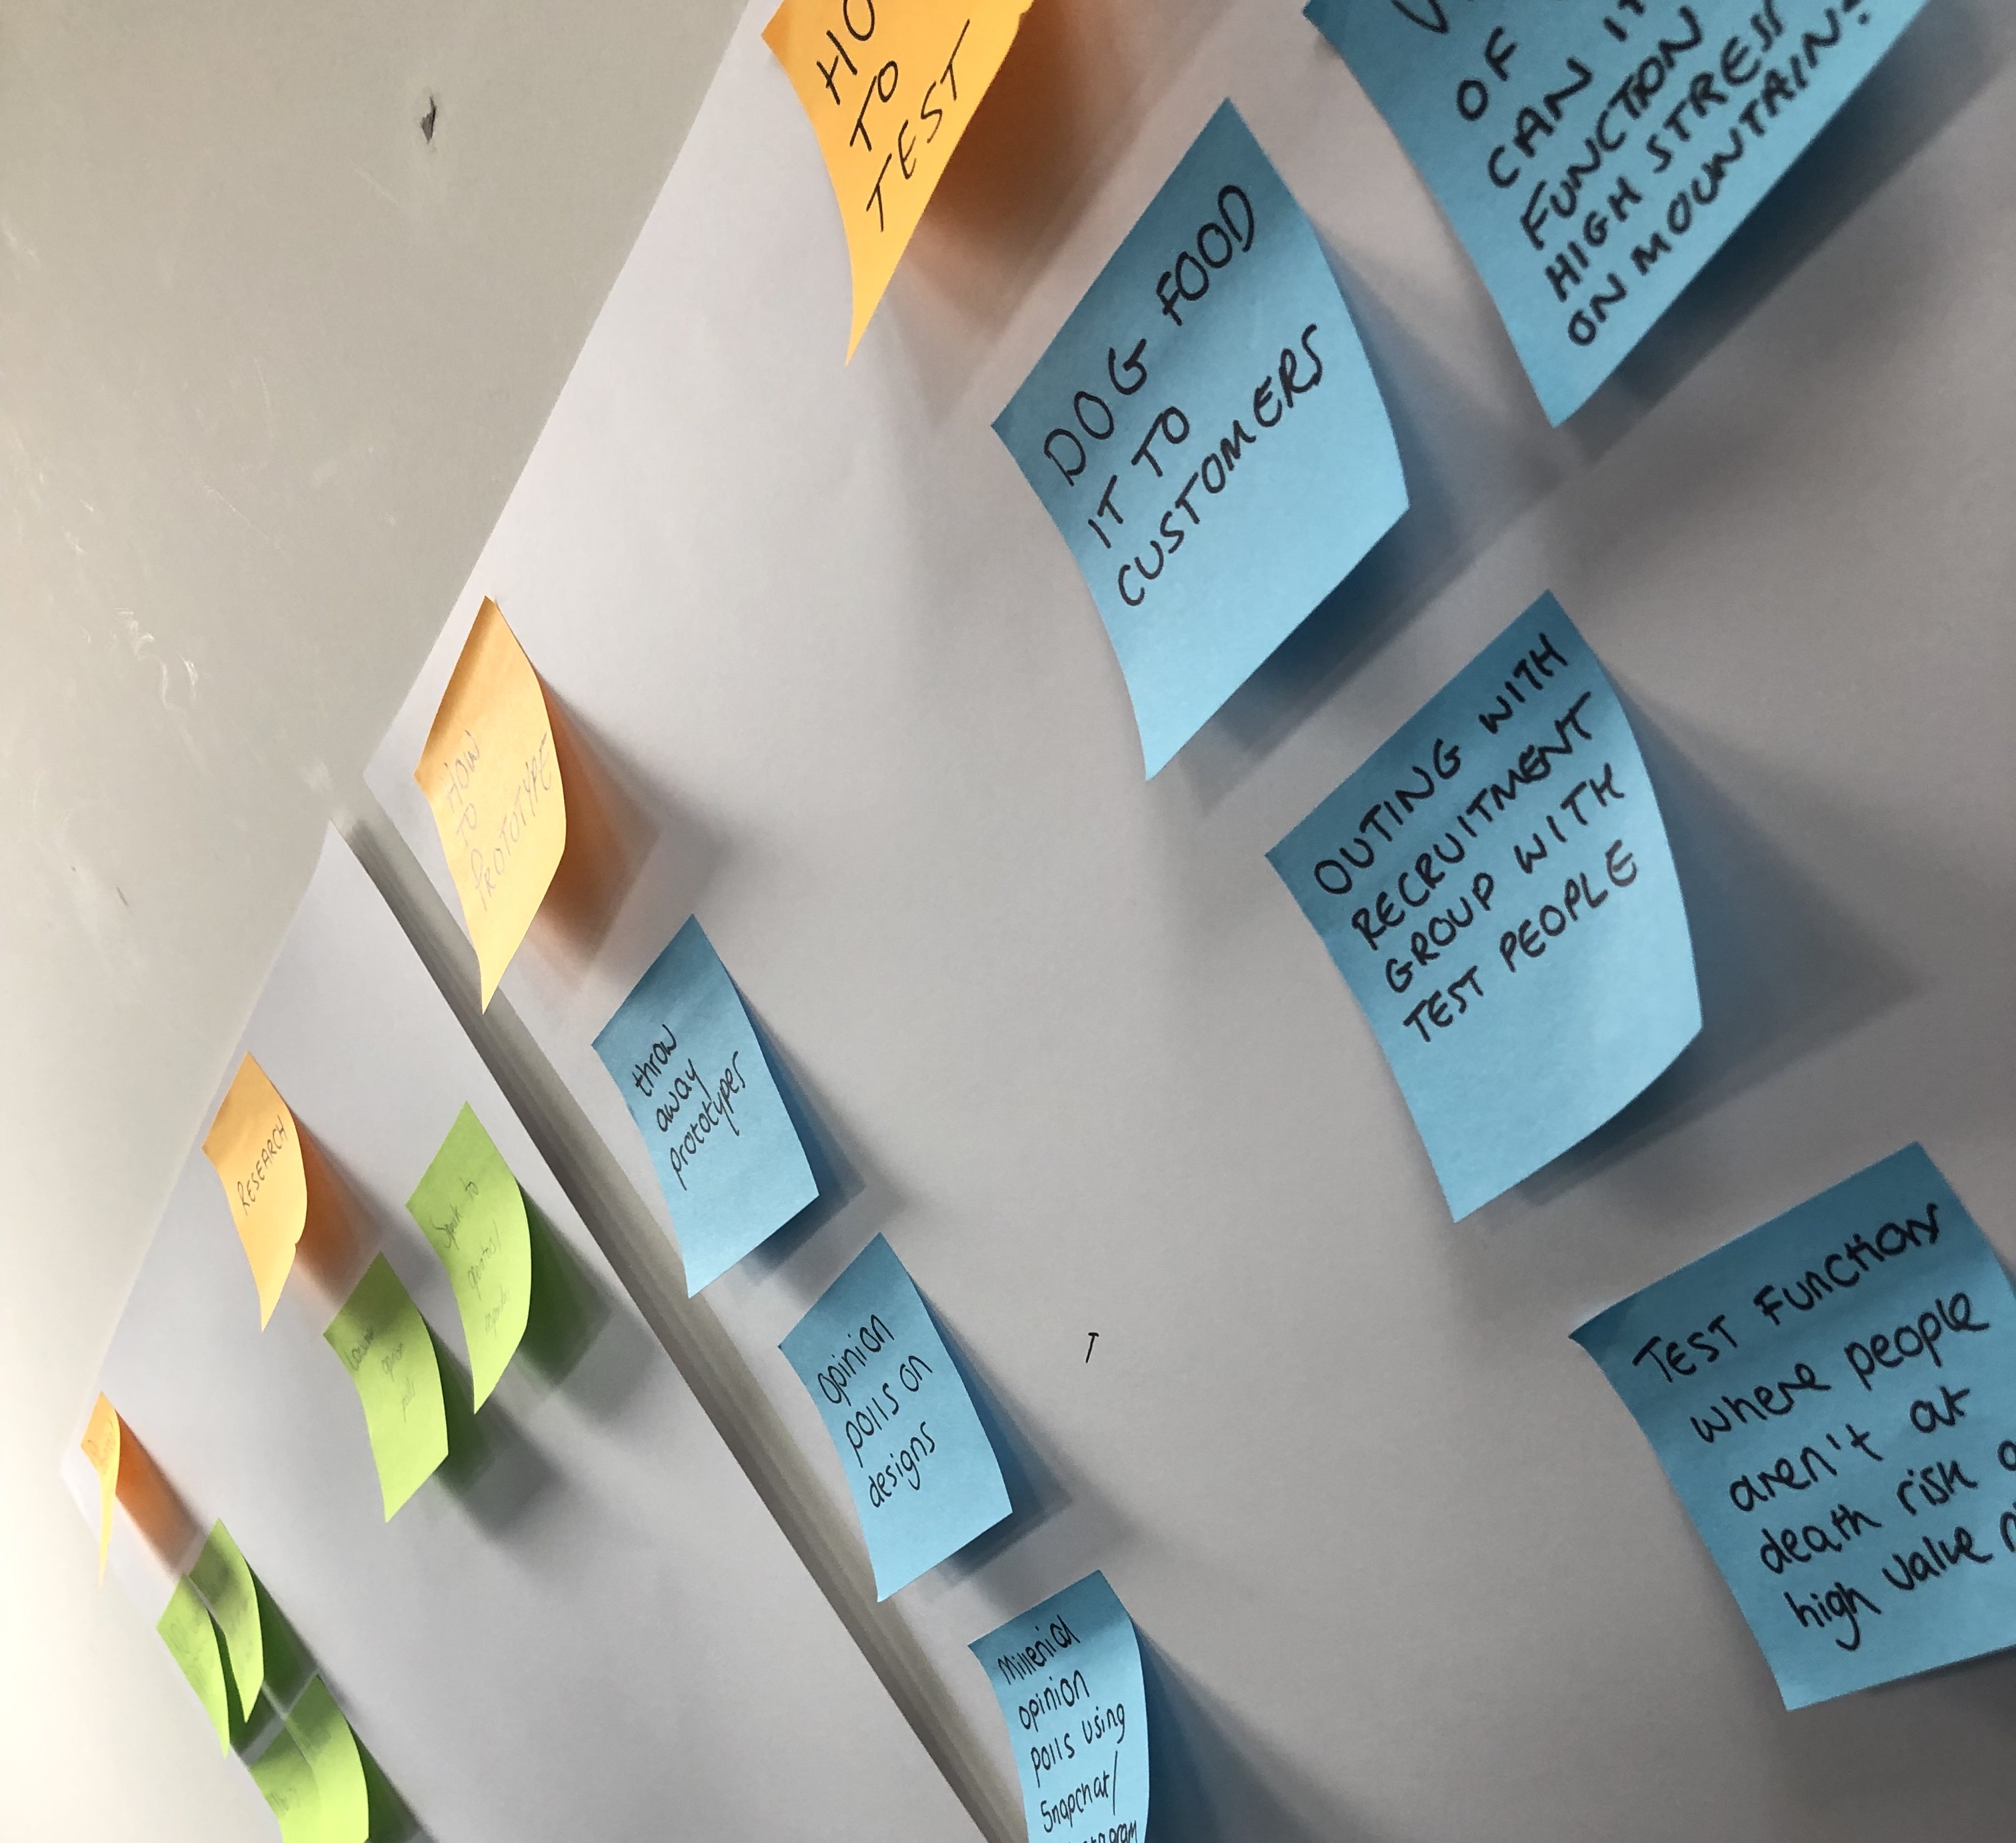 It's not Agile without a wall of post its!